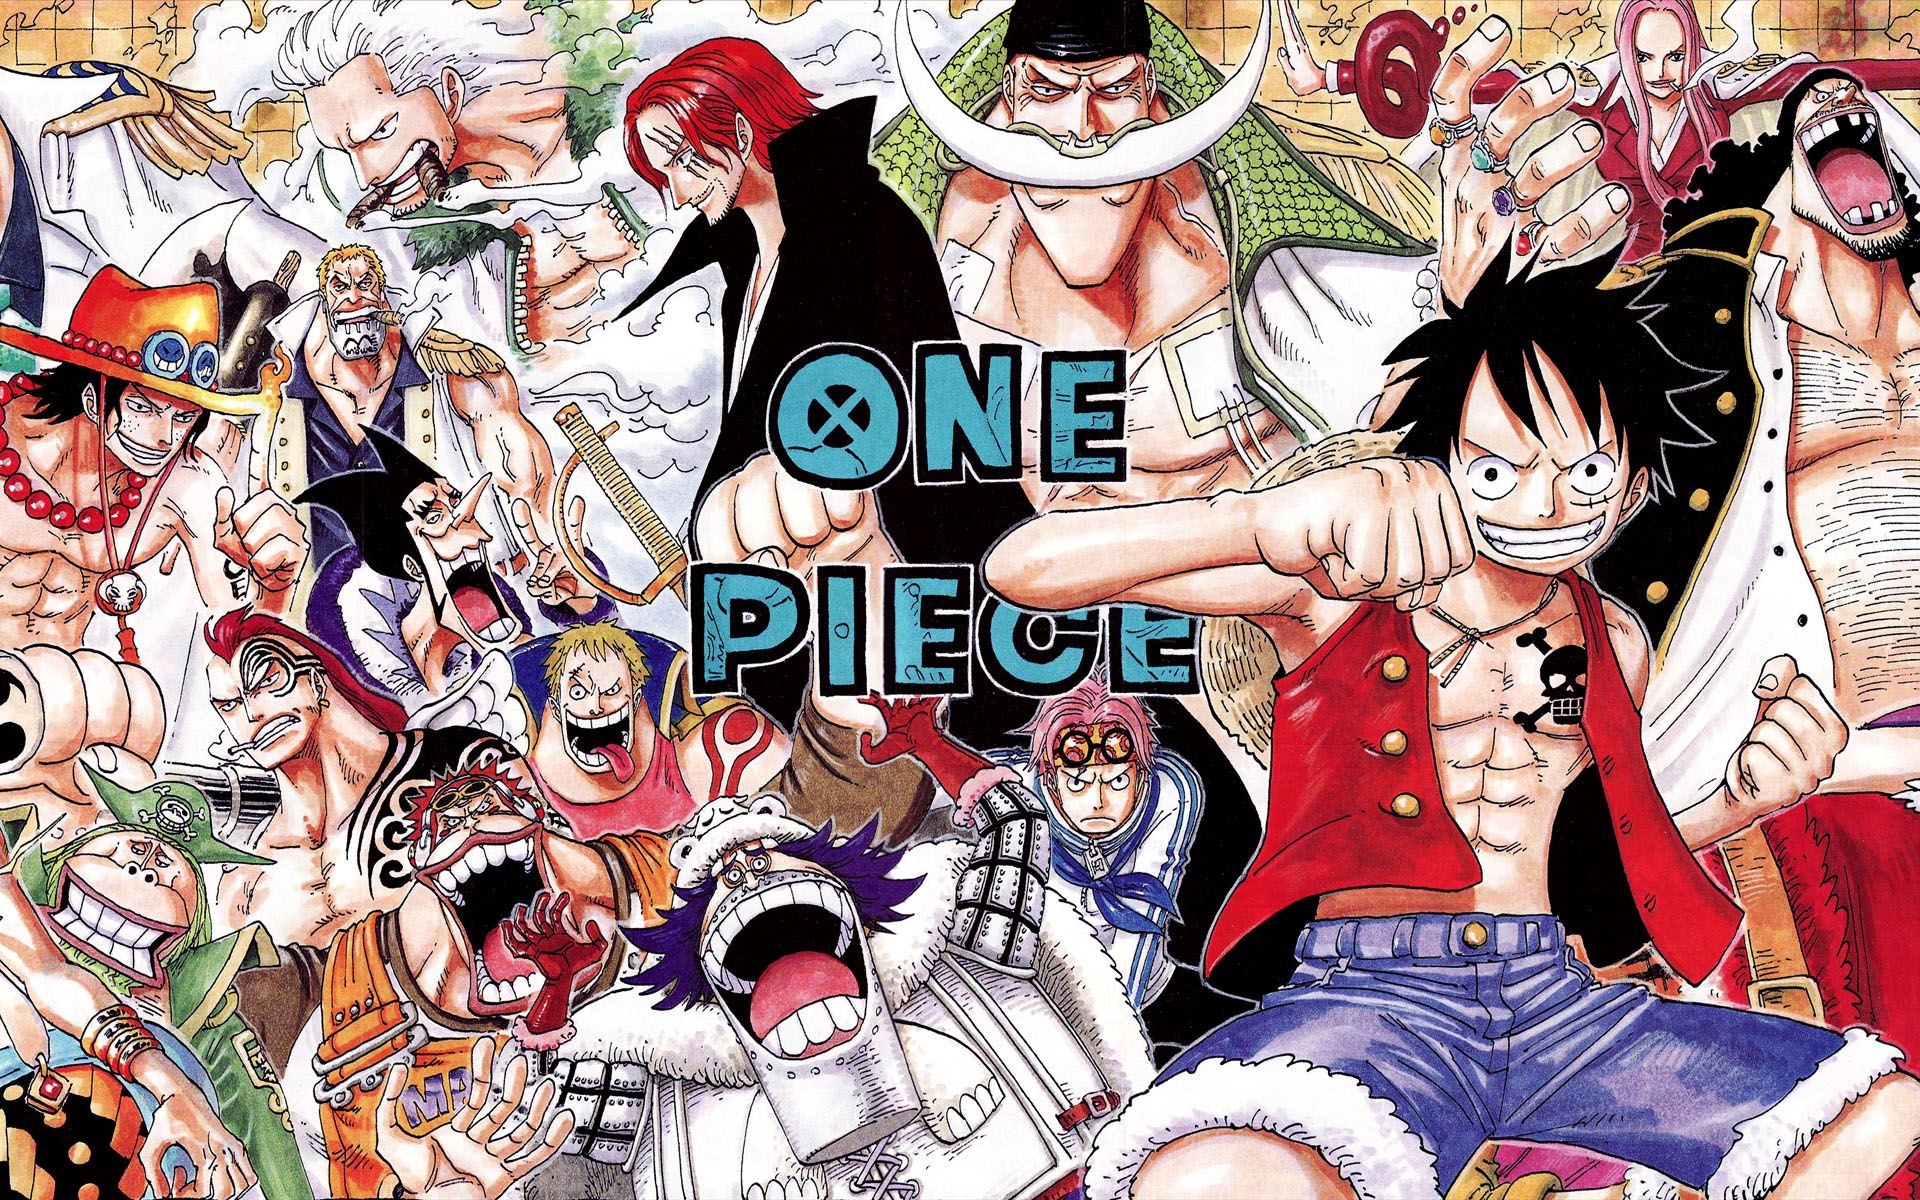 One Piece Anime Portgas D Ace Vice Admiral Smoker Monkey D Luffy Shanks 1920x1200